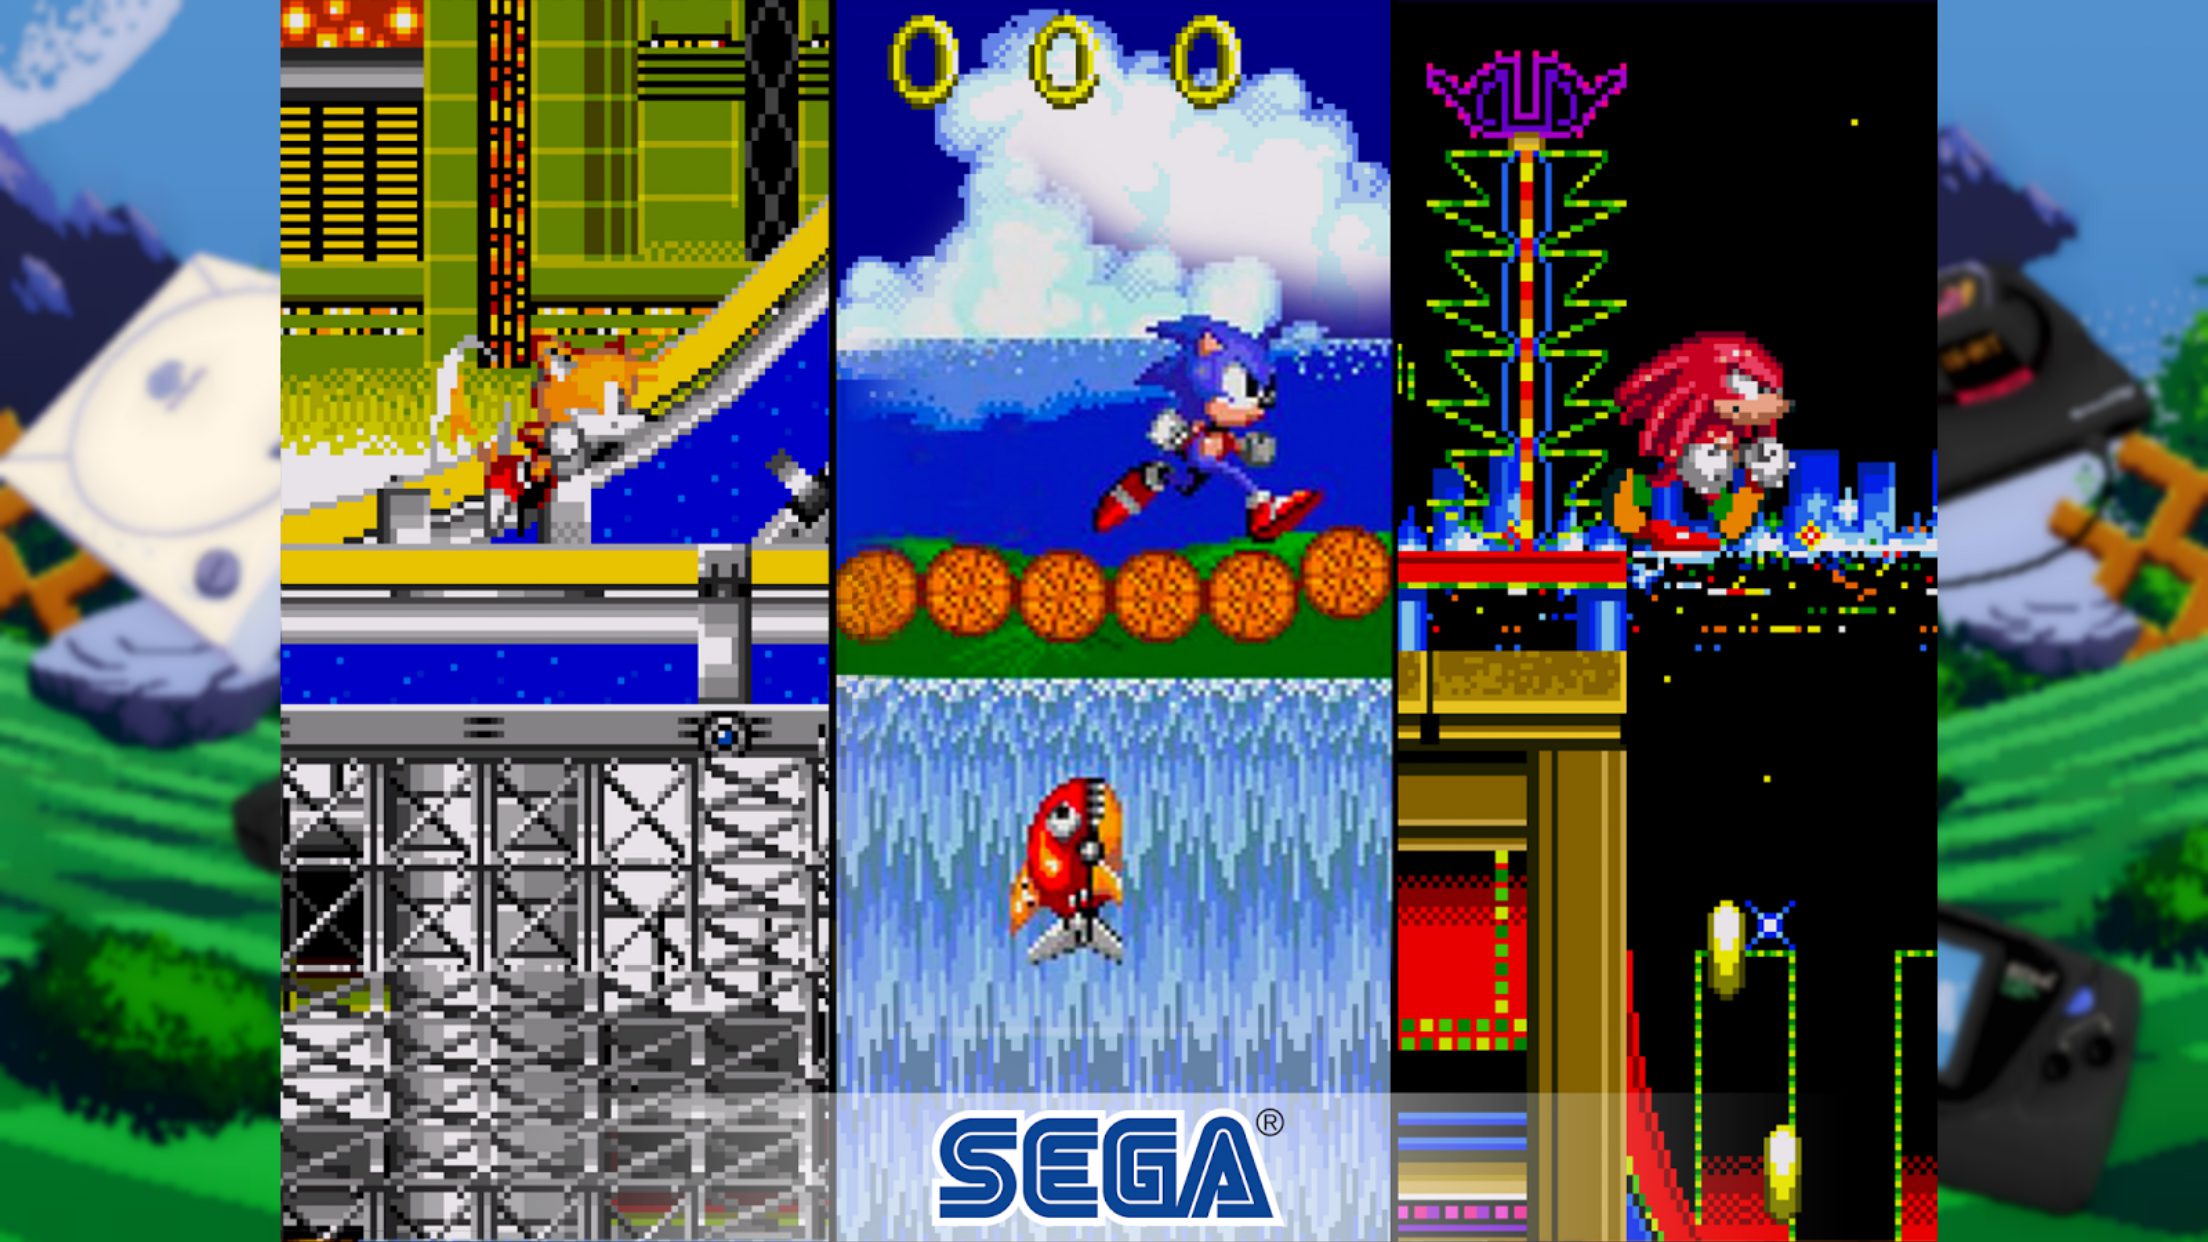 SONIC 2’S DAY – Because This Tuesday is “Sonic’s 2sday